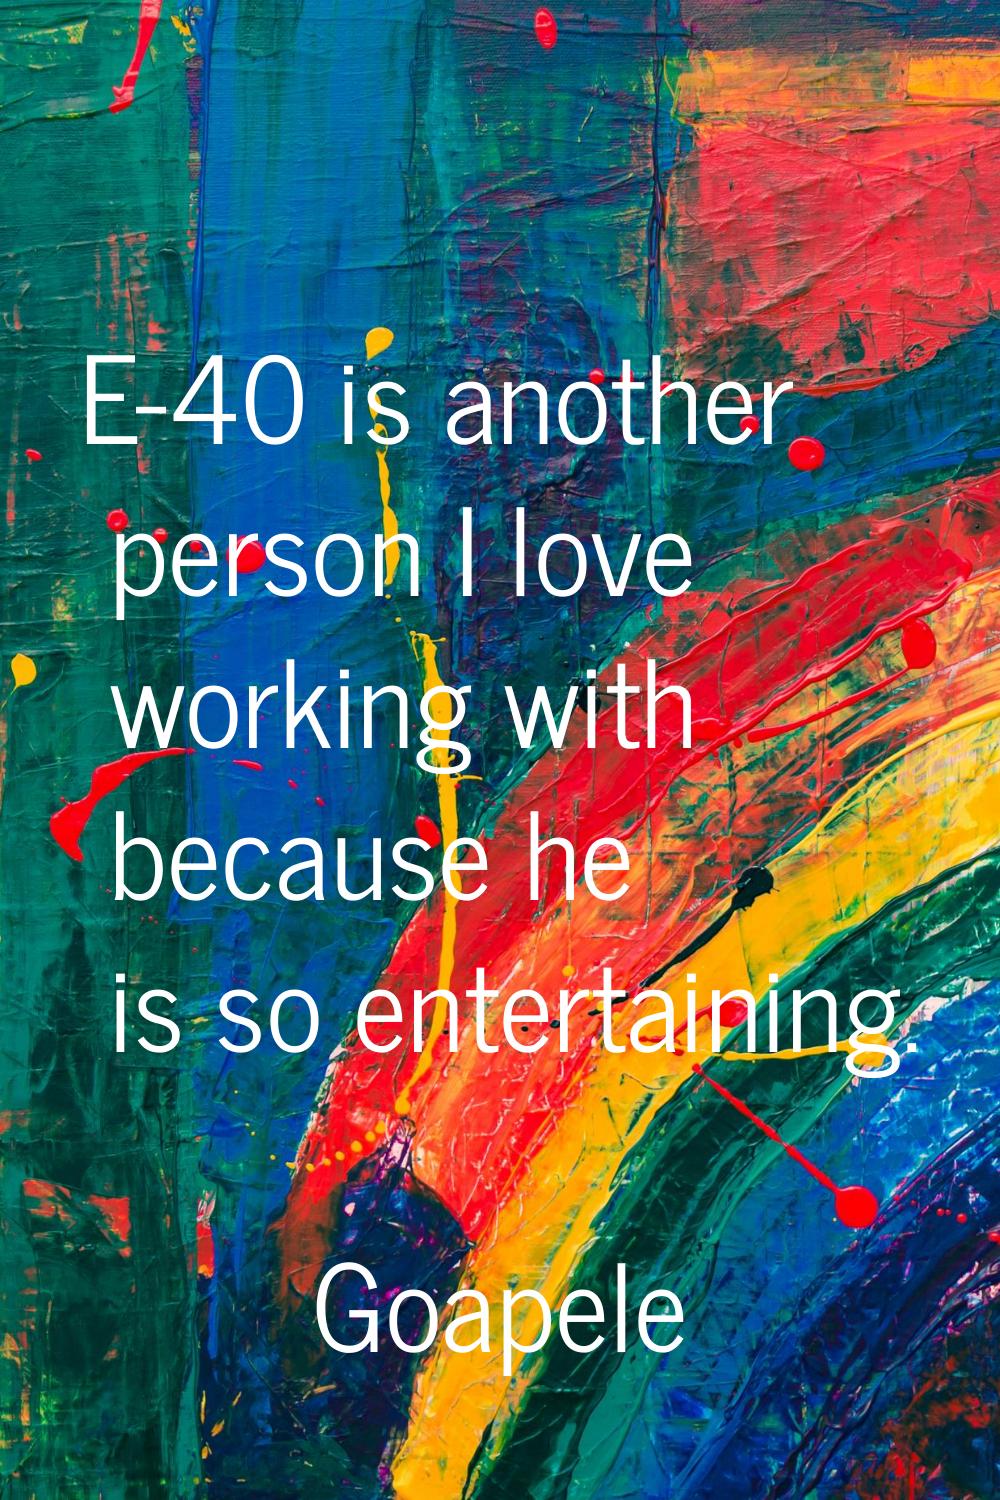 E-40 is another person I love working with because he is so entertaining.